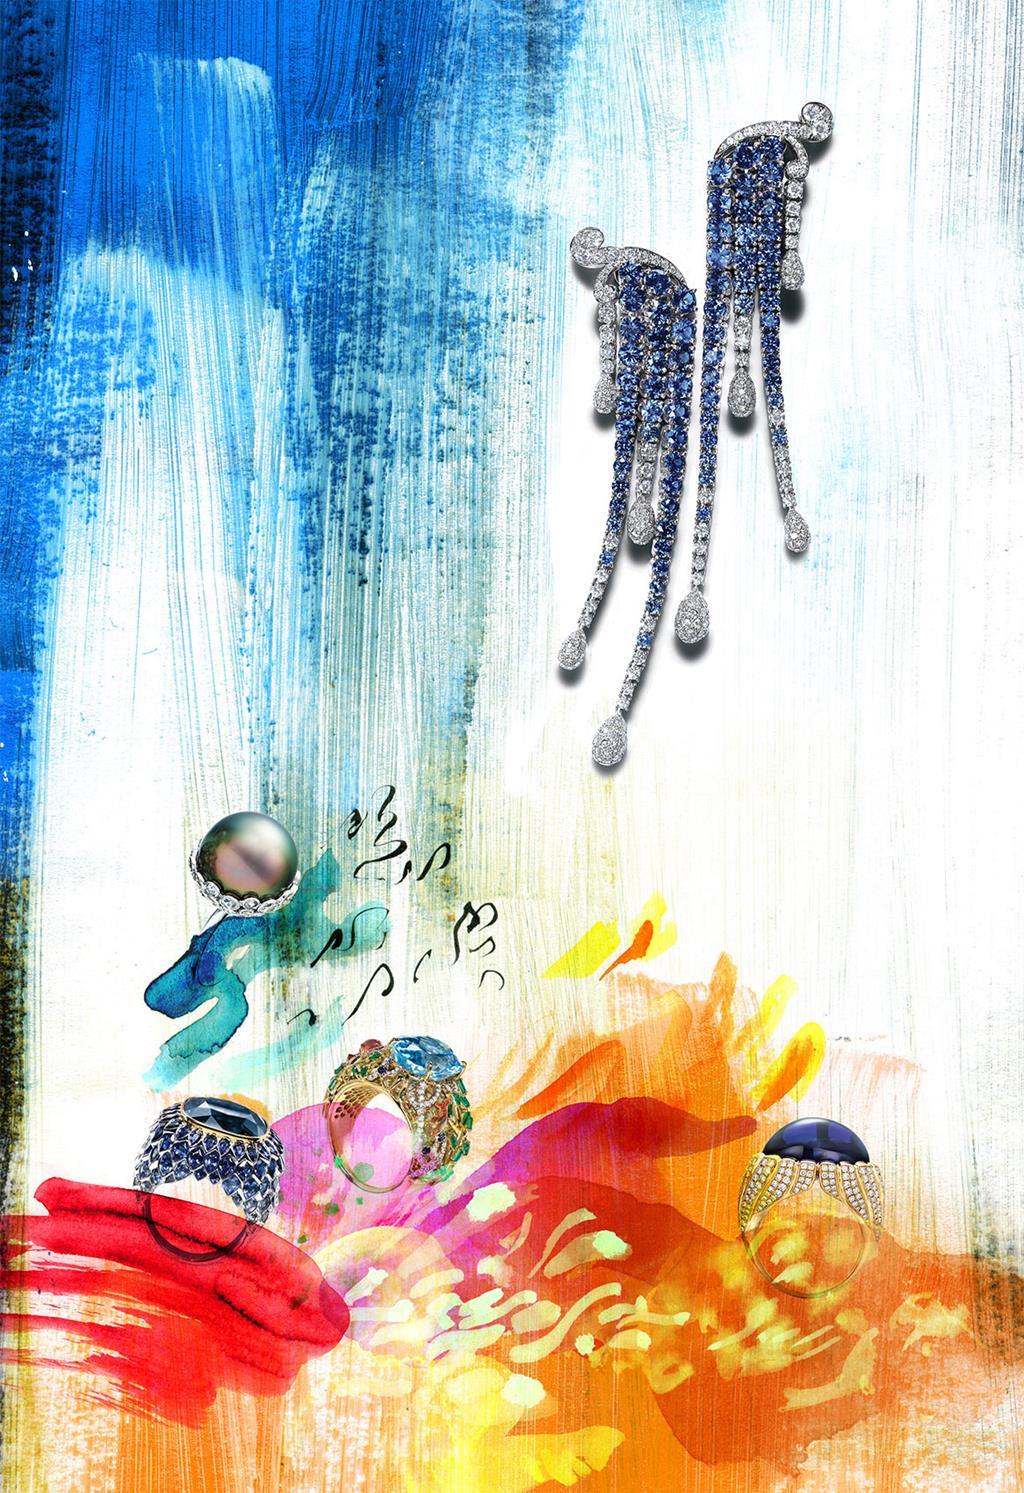 Tiffany & Co.'s Art of the Sea collection illustration for Centurion Magazine by Elisabeth Moch